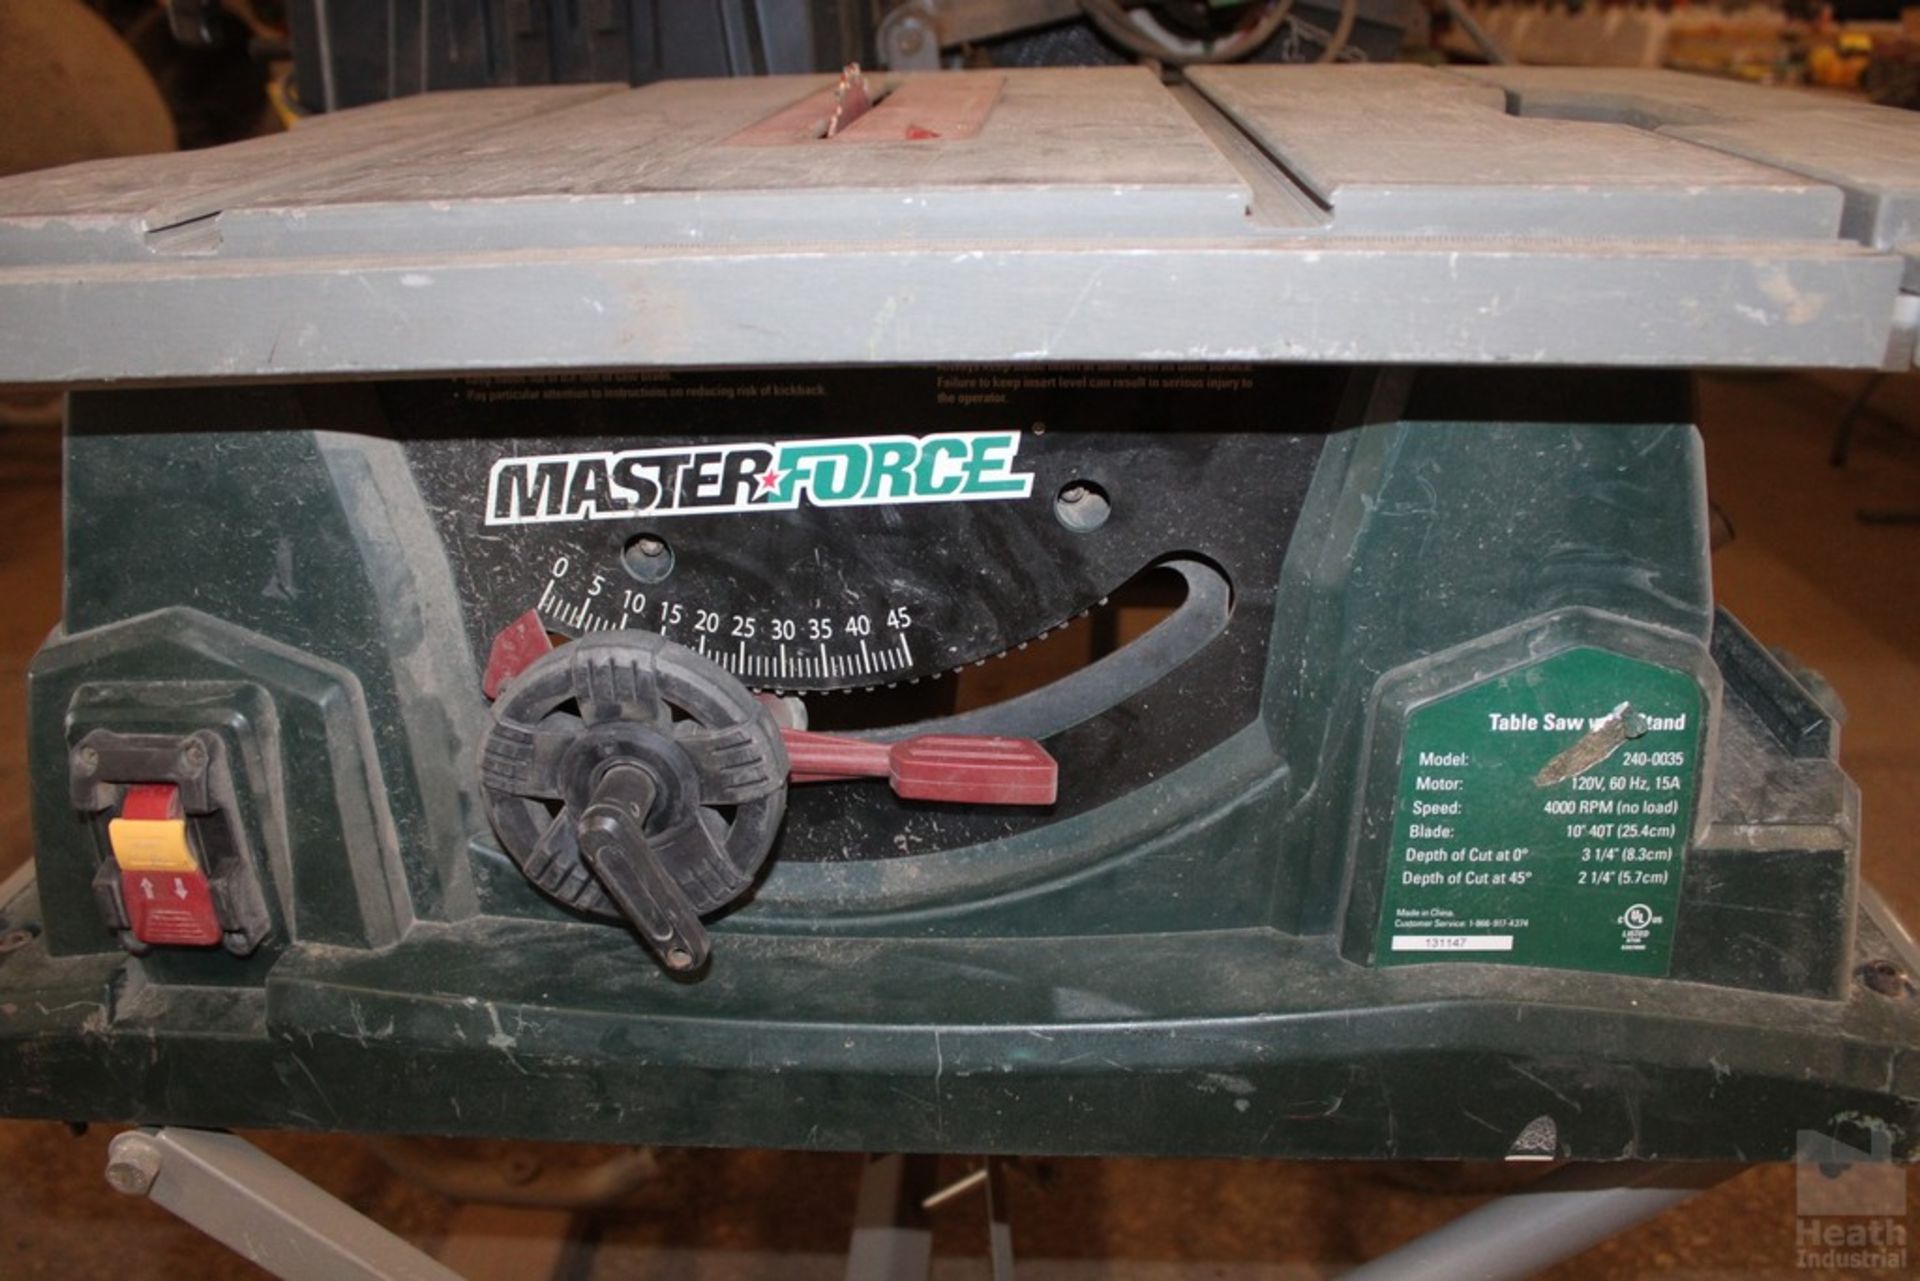 MASTERFORCE MODEL 240-0035 PORTABLE CONTRACTORS TABLE SAW, 10" - Image 2 of 3